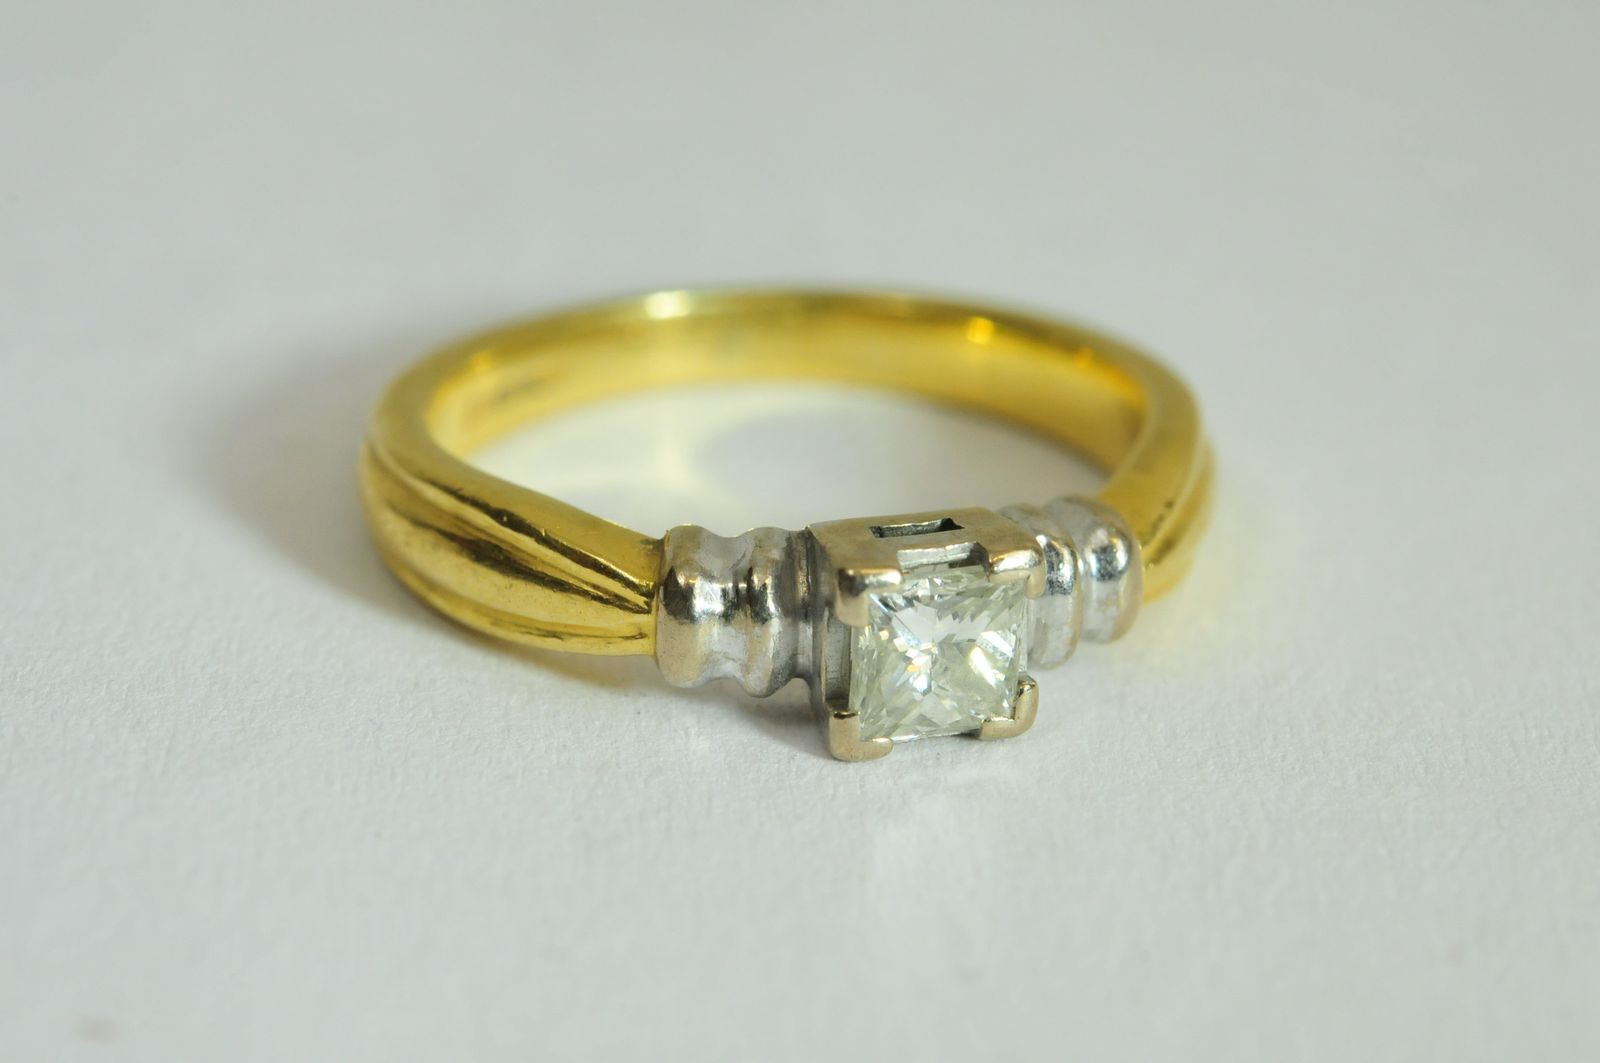 A ladies 18ct gold diamond solitaire ring set with a single princess cut diamond